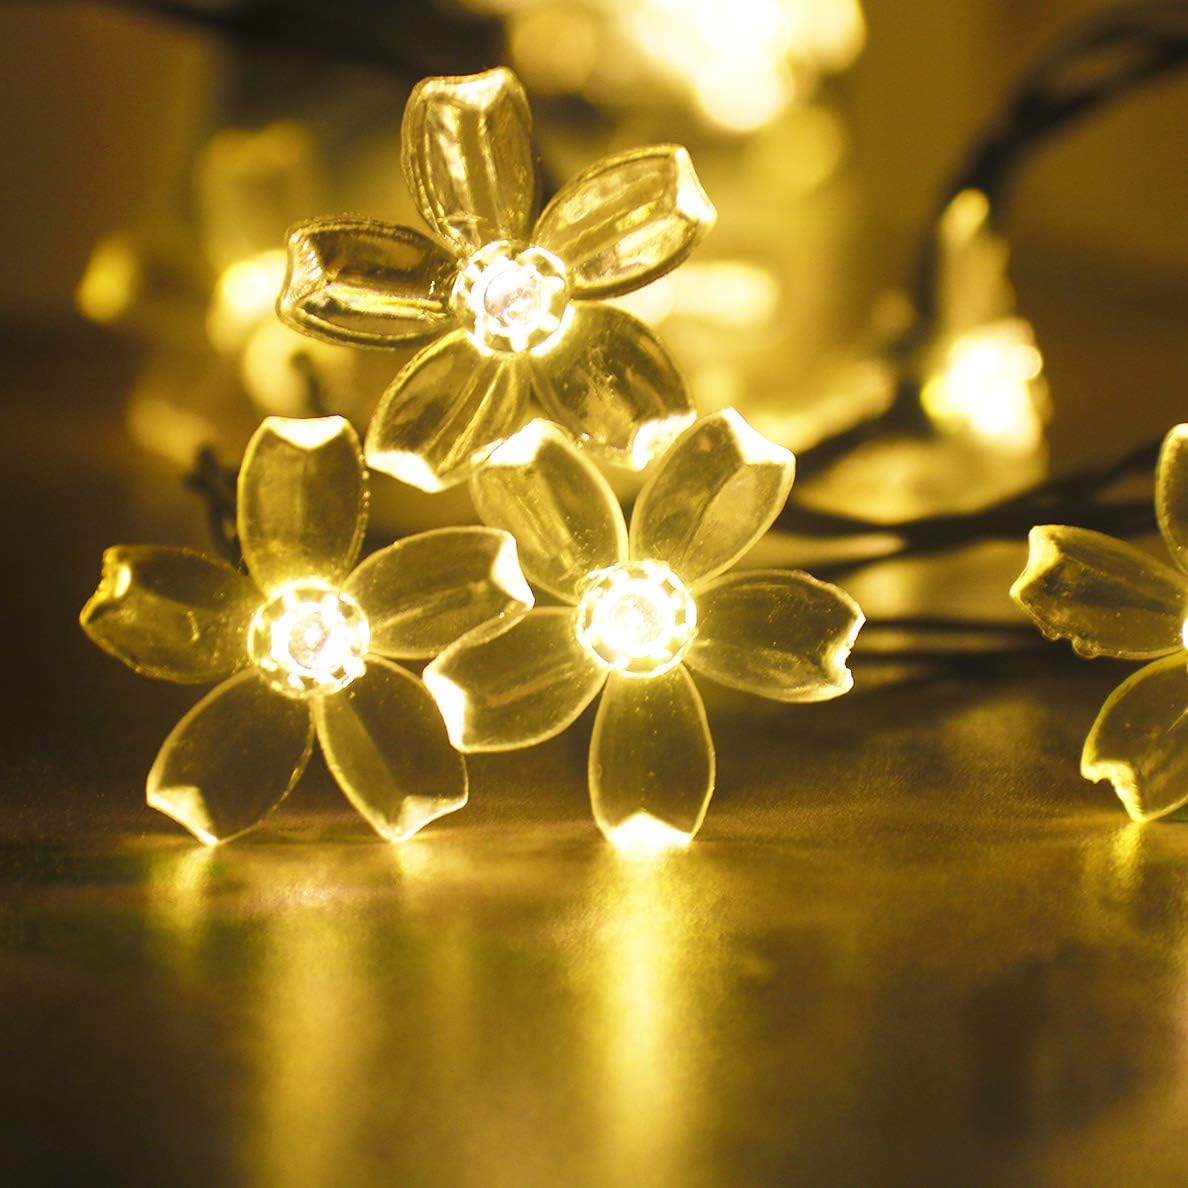 Solar Outdoor Cherry Blossom Strings Lights, 23 Feet 50 LEDs Solar Fairy Flower Lights Waterproof,Christmas Tree Lights,for Home, Lawn, Wedding, Patio,Party and Holiday Decorations Warm White